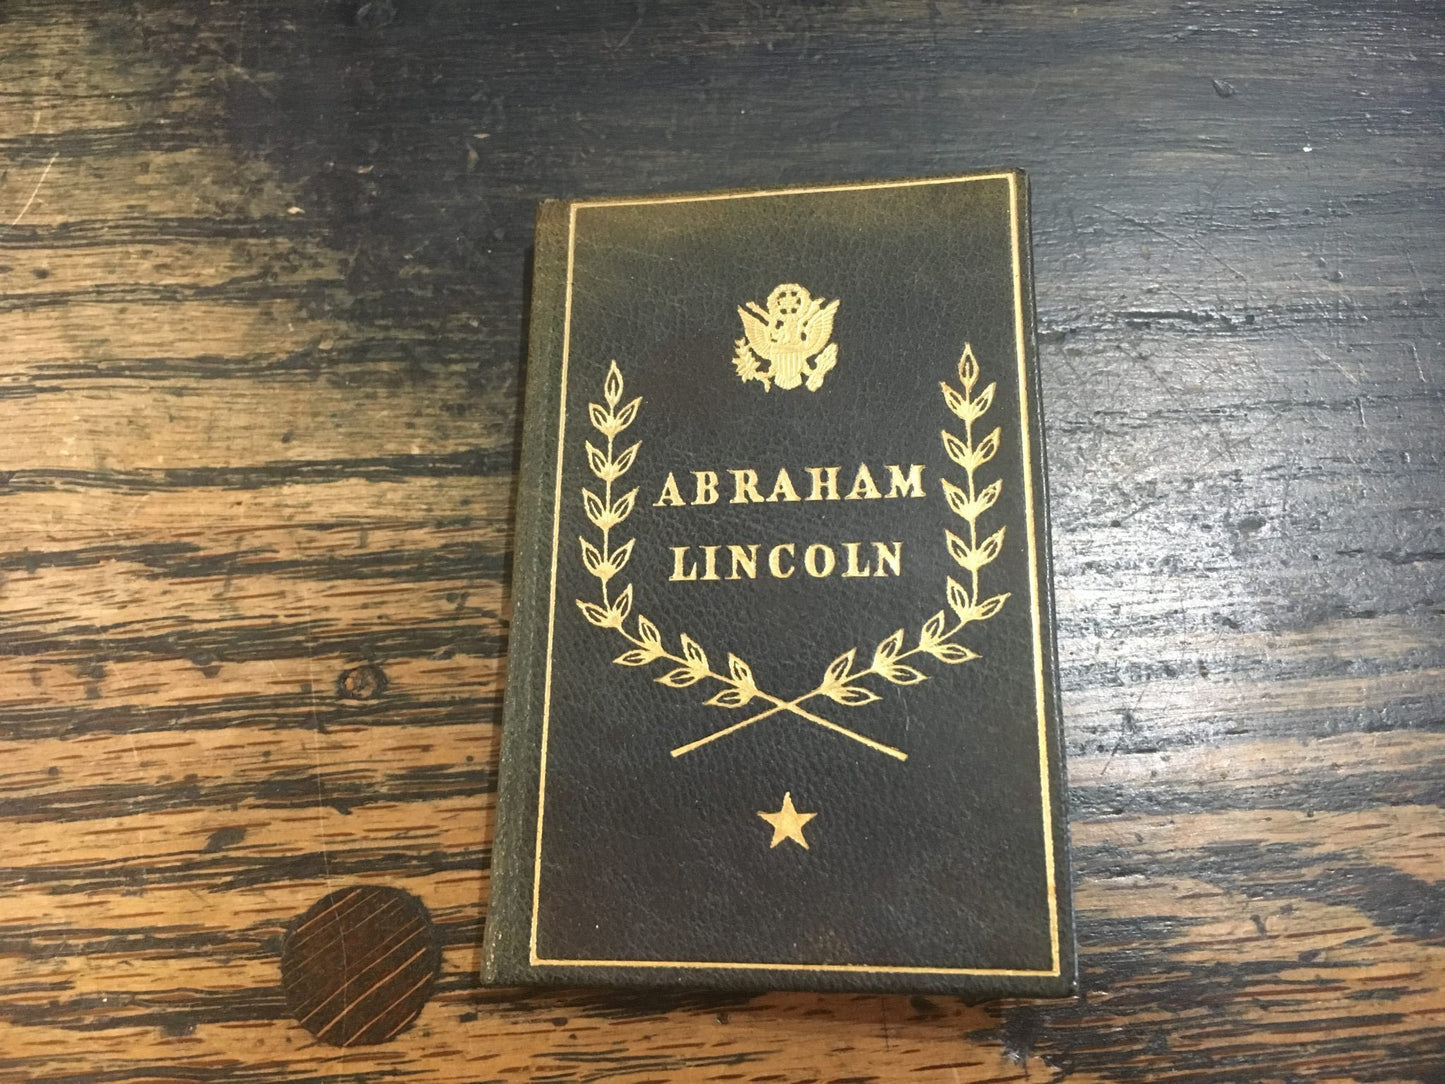 Abraham Lincoln President of the United States 1861-1865: Selections From His Writings